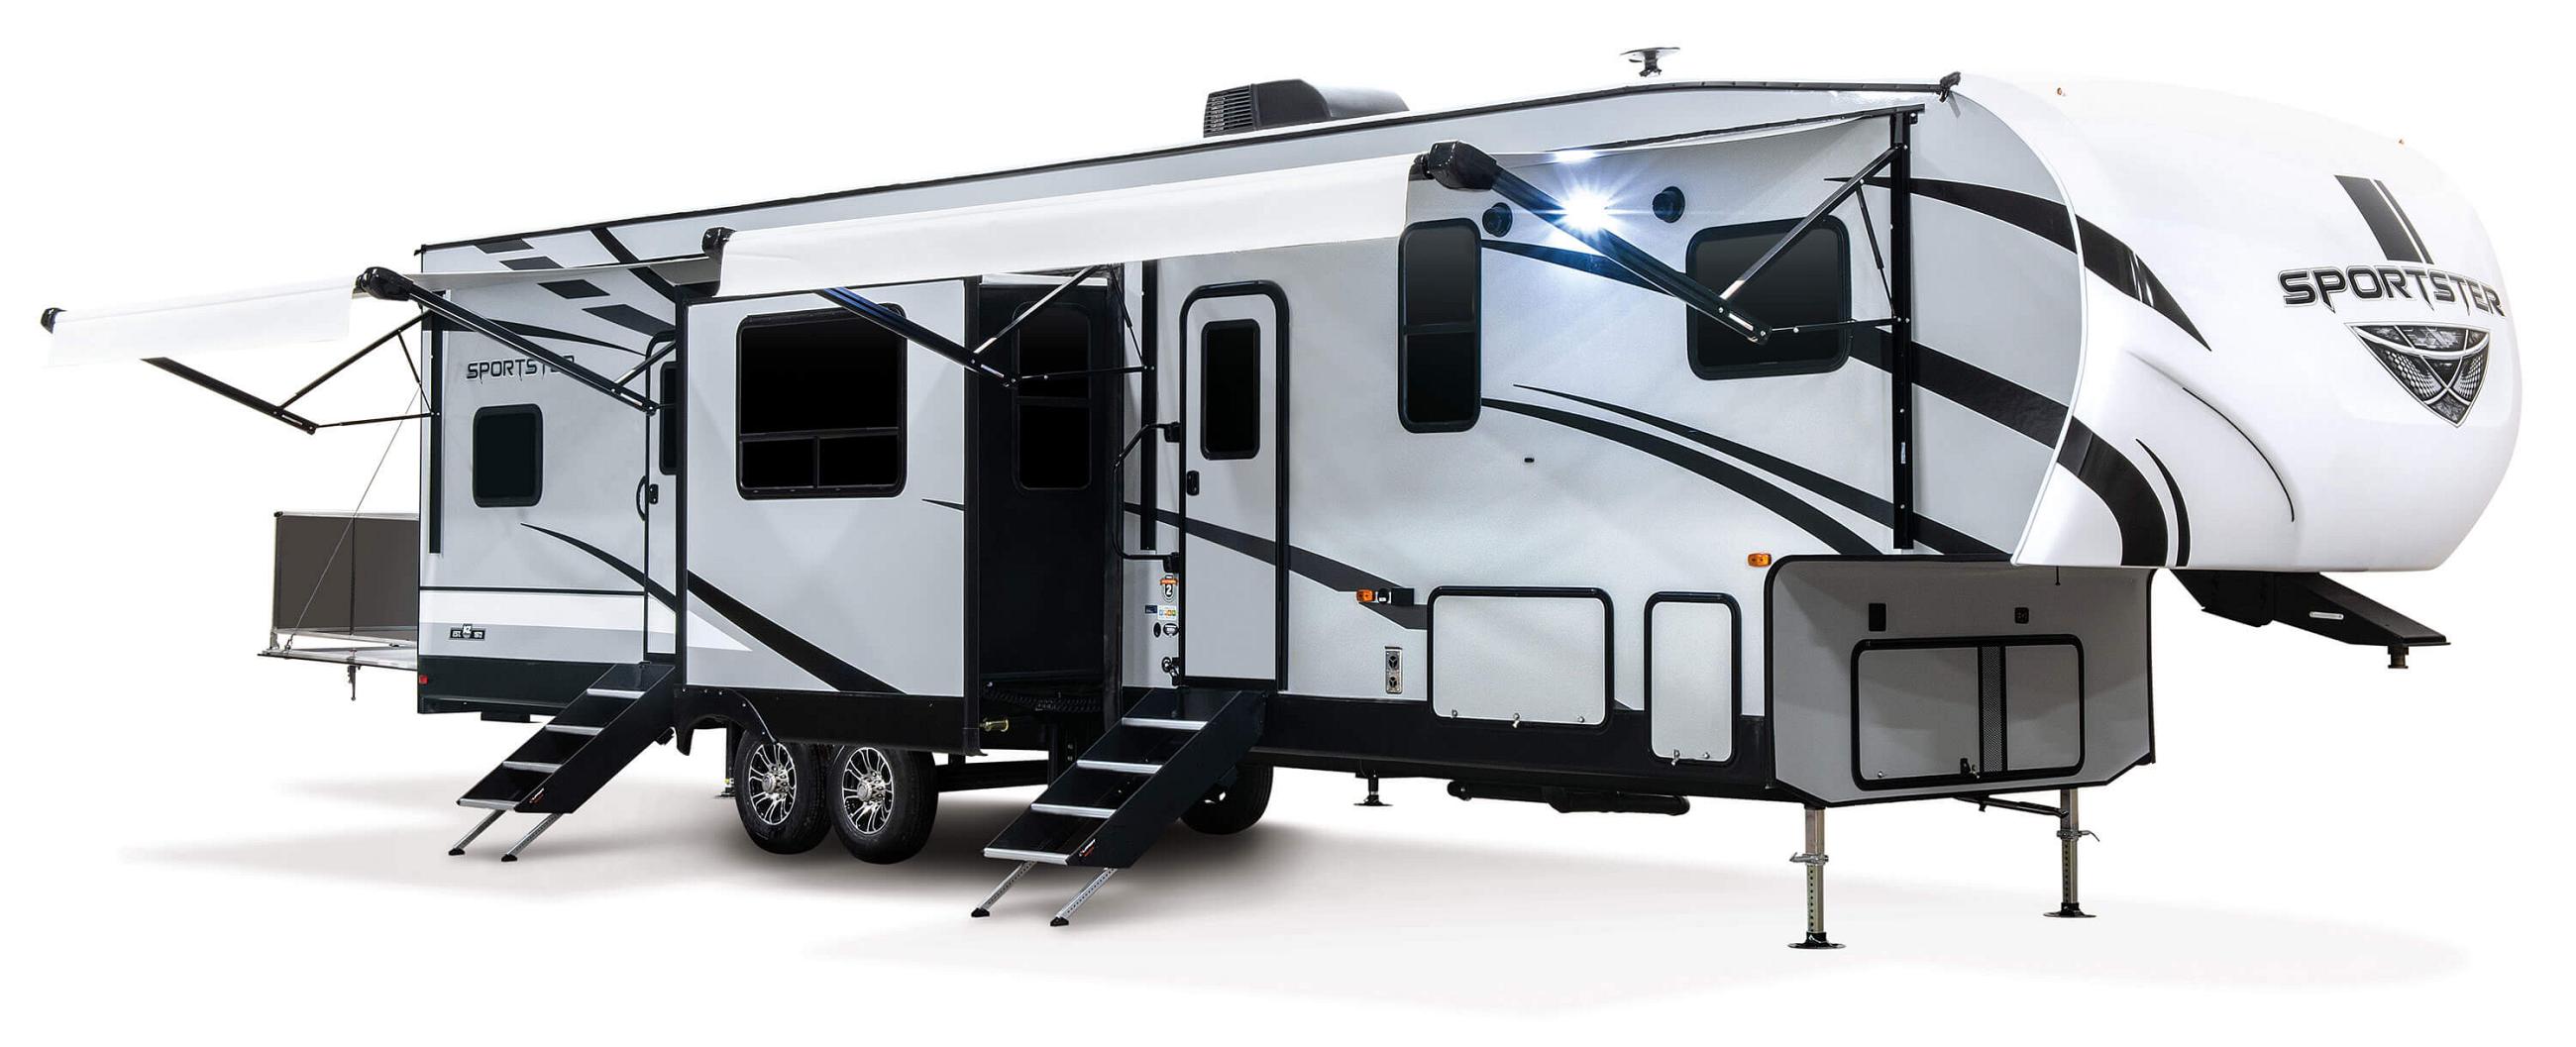 Sportster 353th13 Fifth Wheel Toy